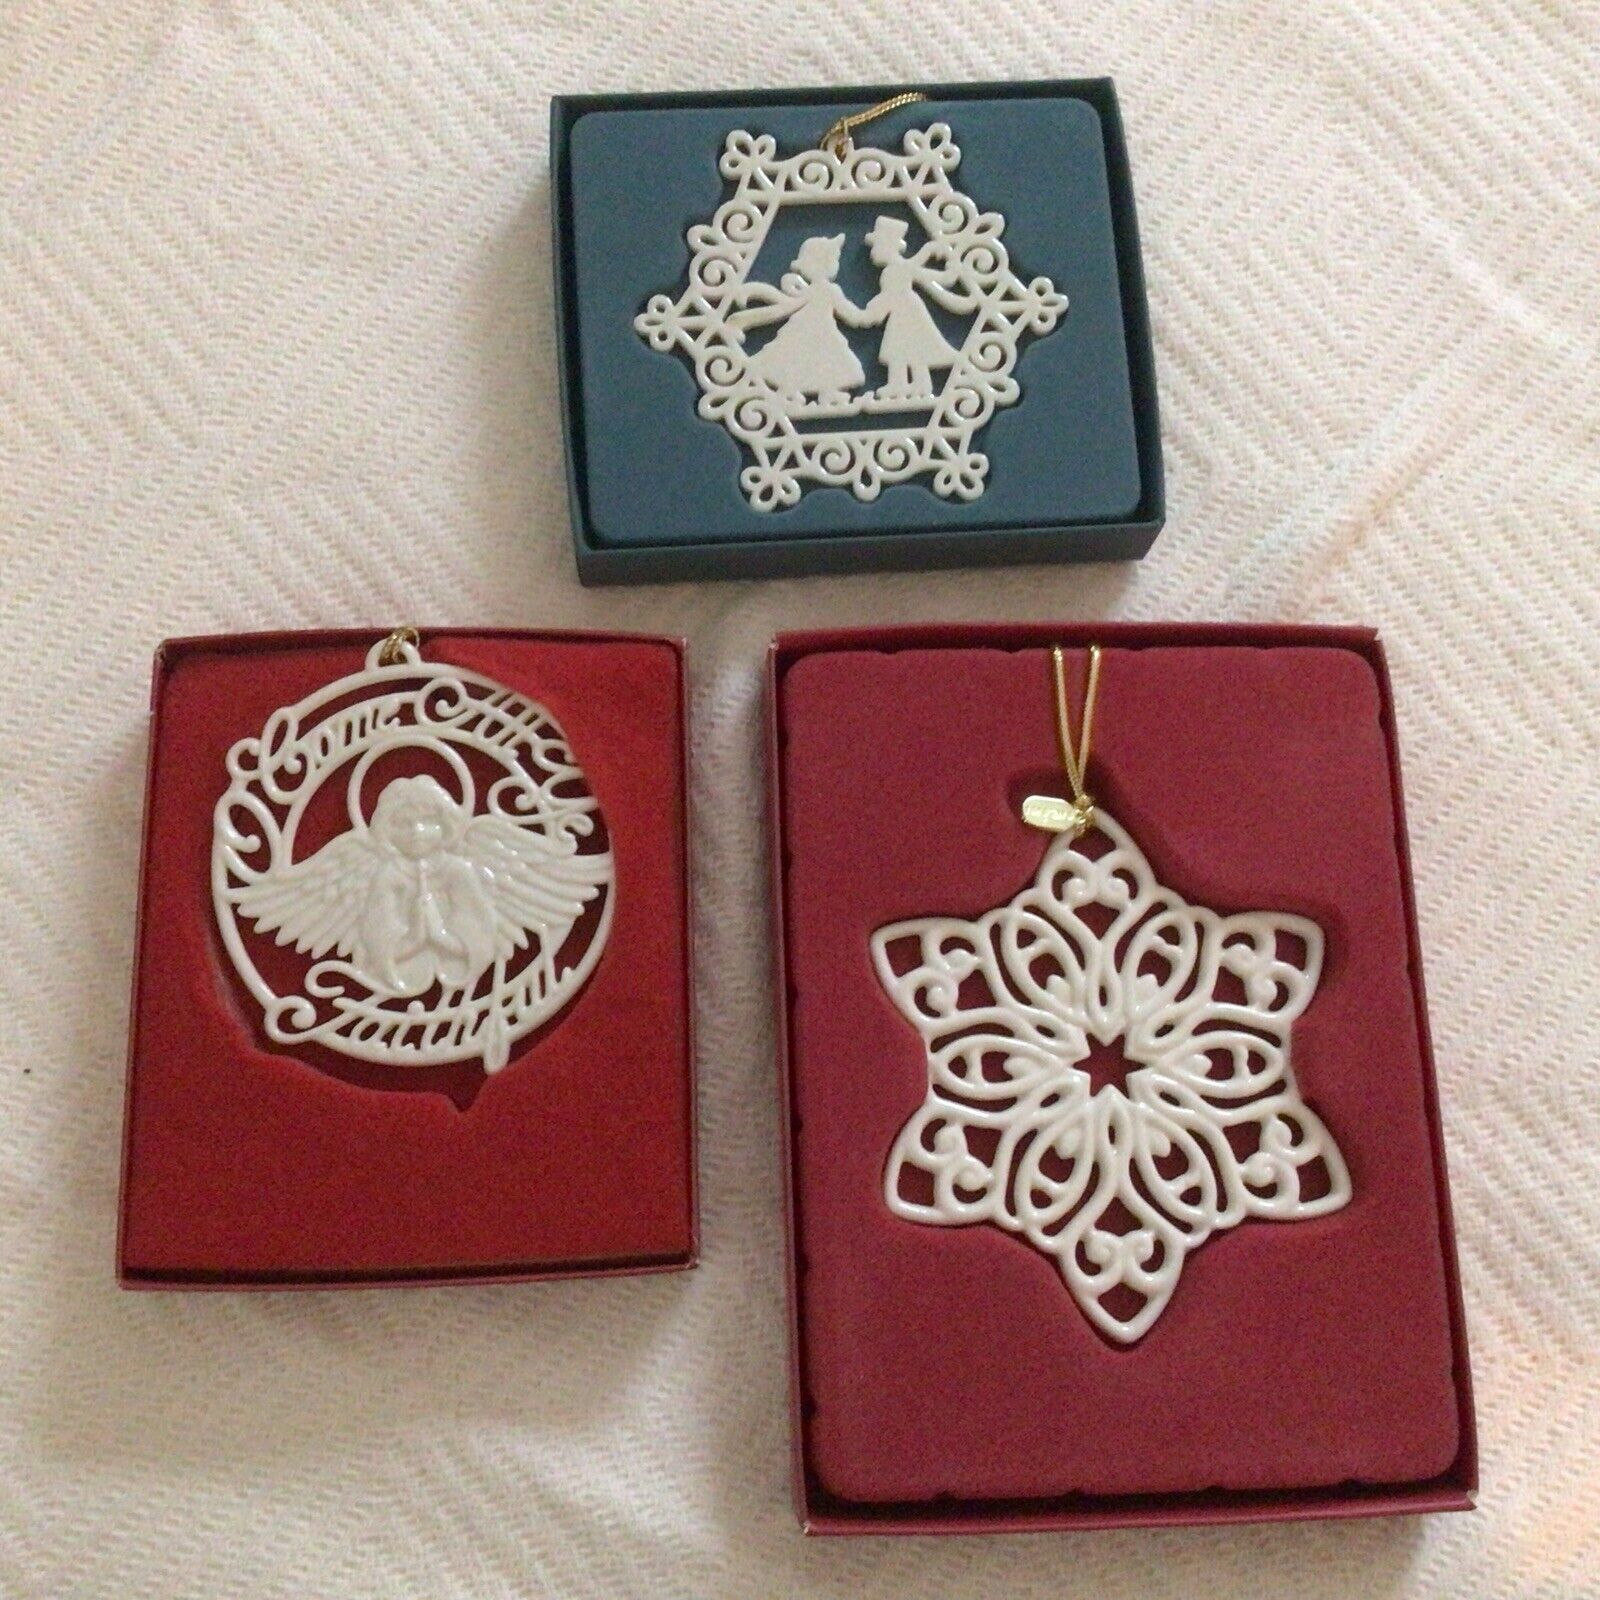 Lenox Porcelain Christmas Ornaments - Lot of 3 With  Boxes - GREAT BUY